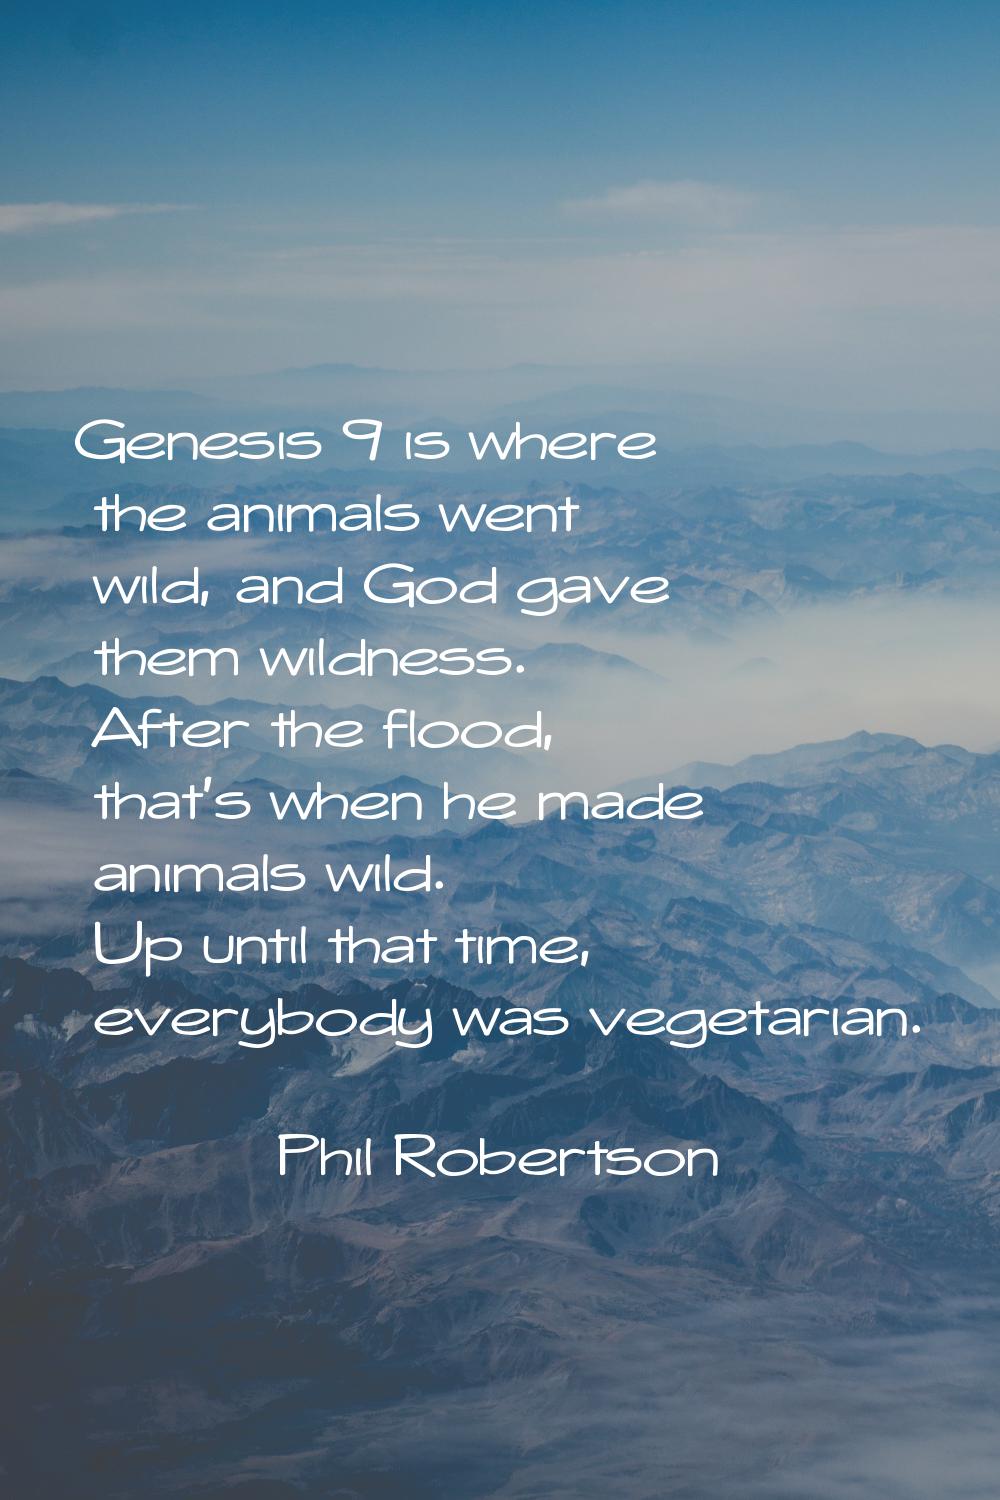 Genesis 9 is where the animals went wild, and God gave them wildness. After the flood, that's when 